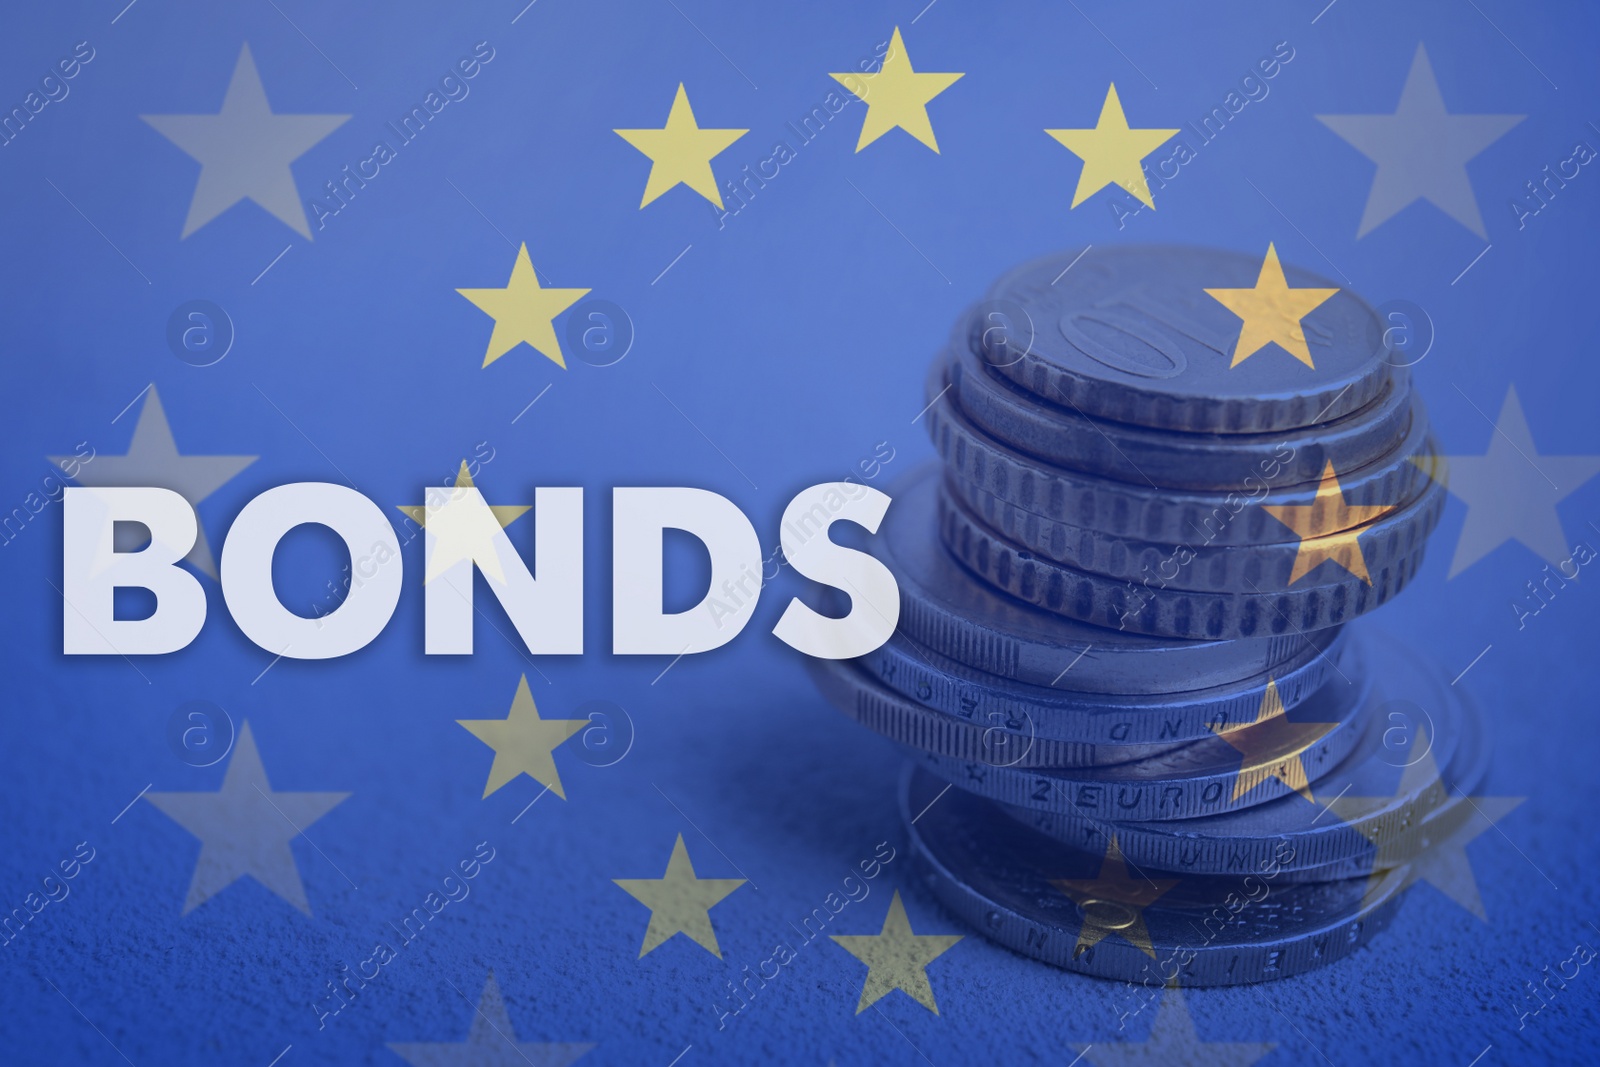 Image of Double exposure of European Union flag and coins, closeup view. Bonds concept